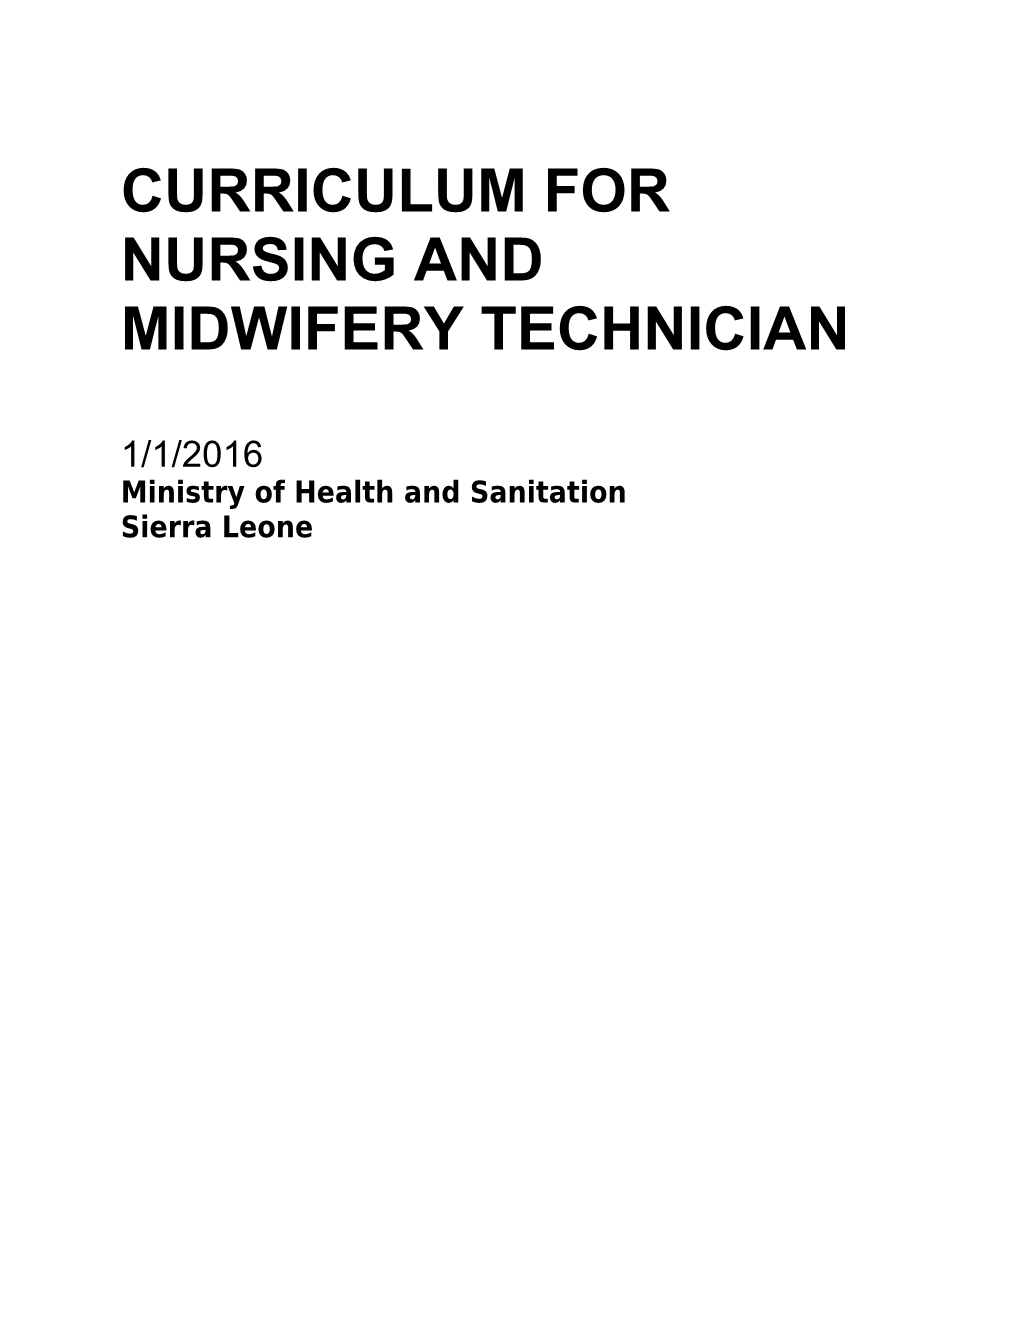 Curriculum for Nursing and Midwifery Technician